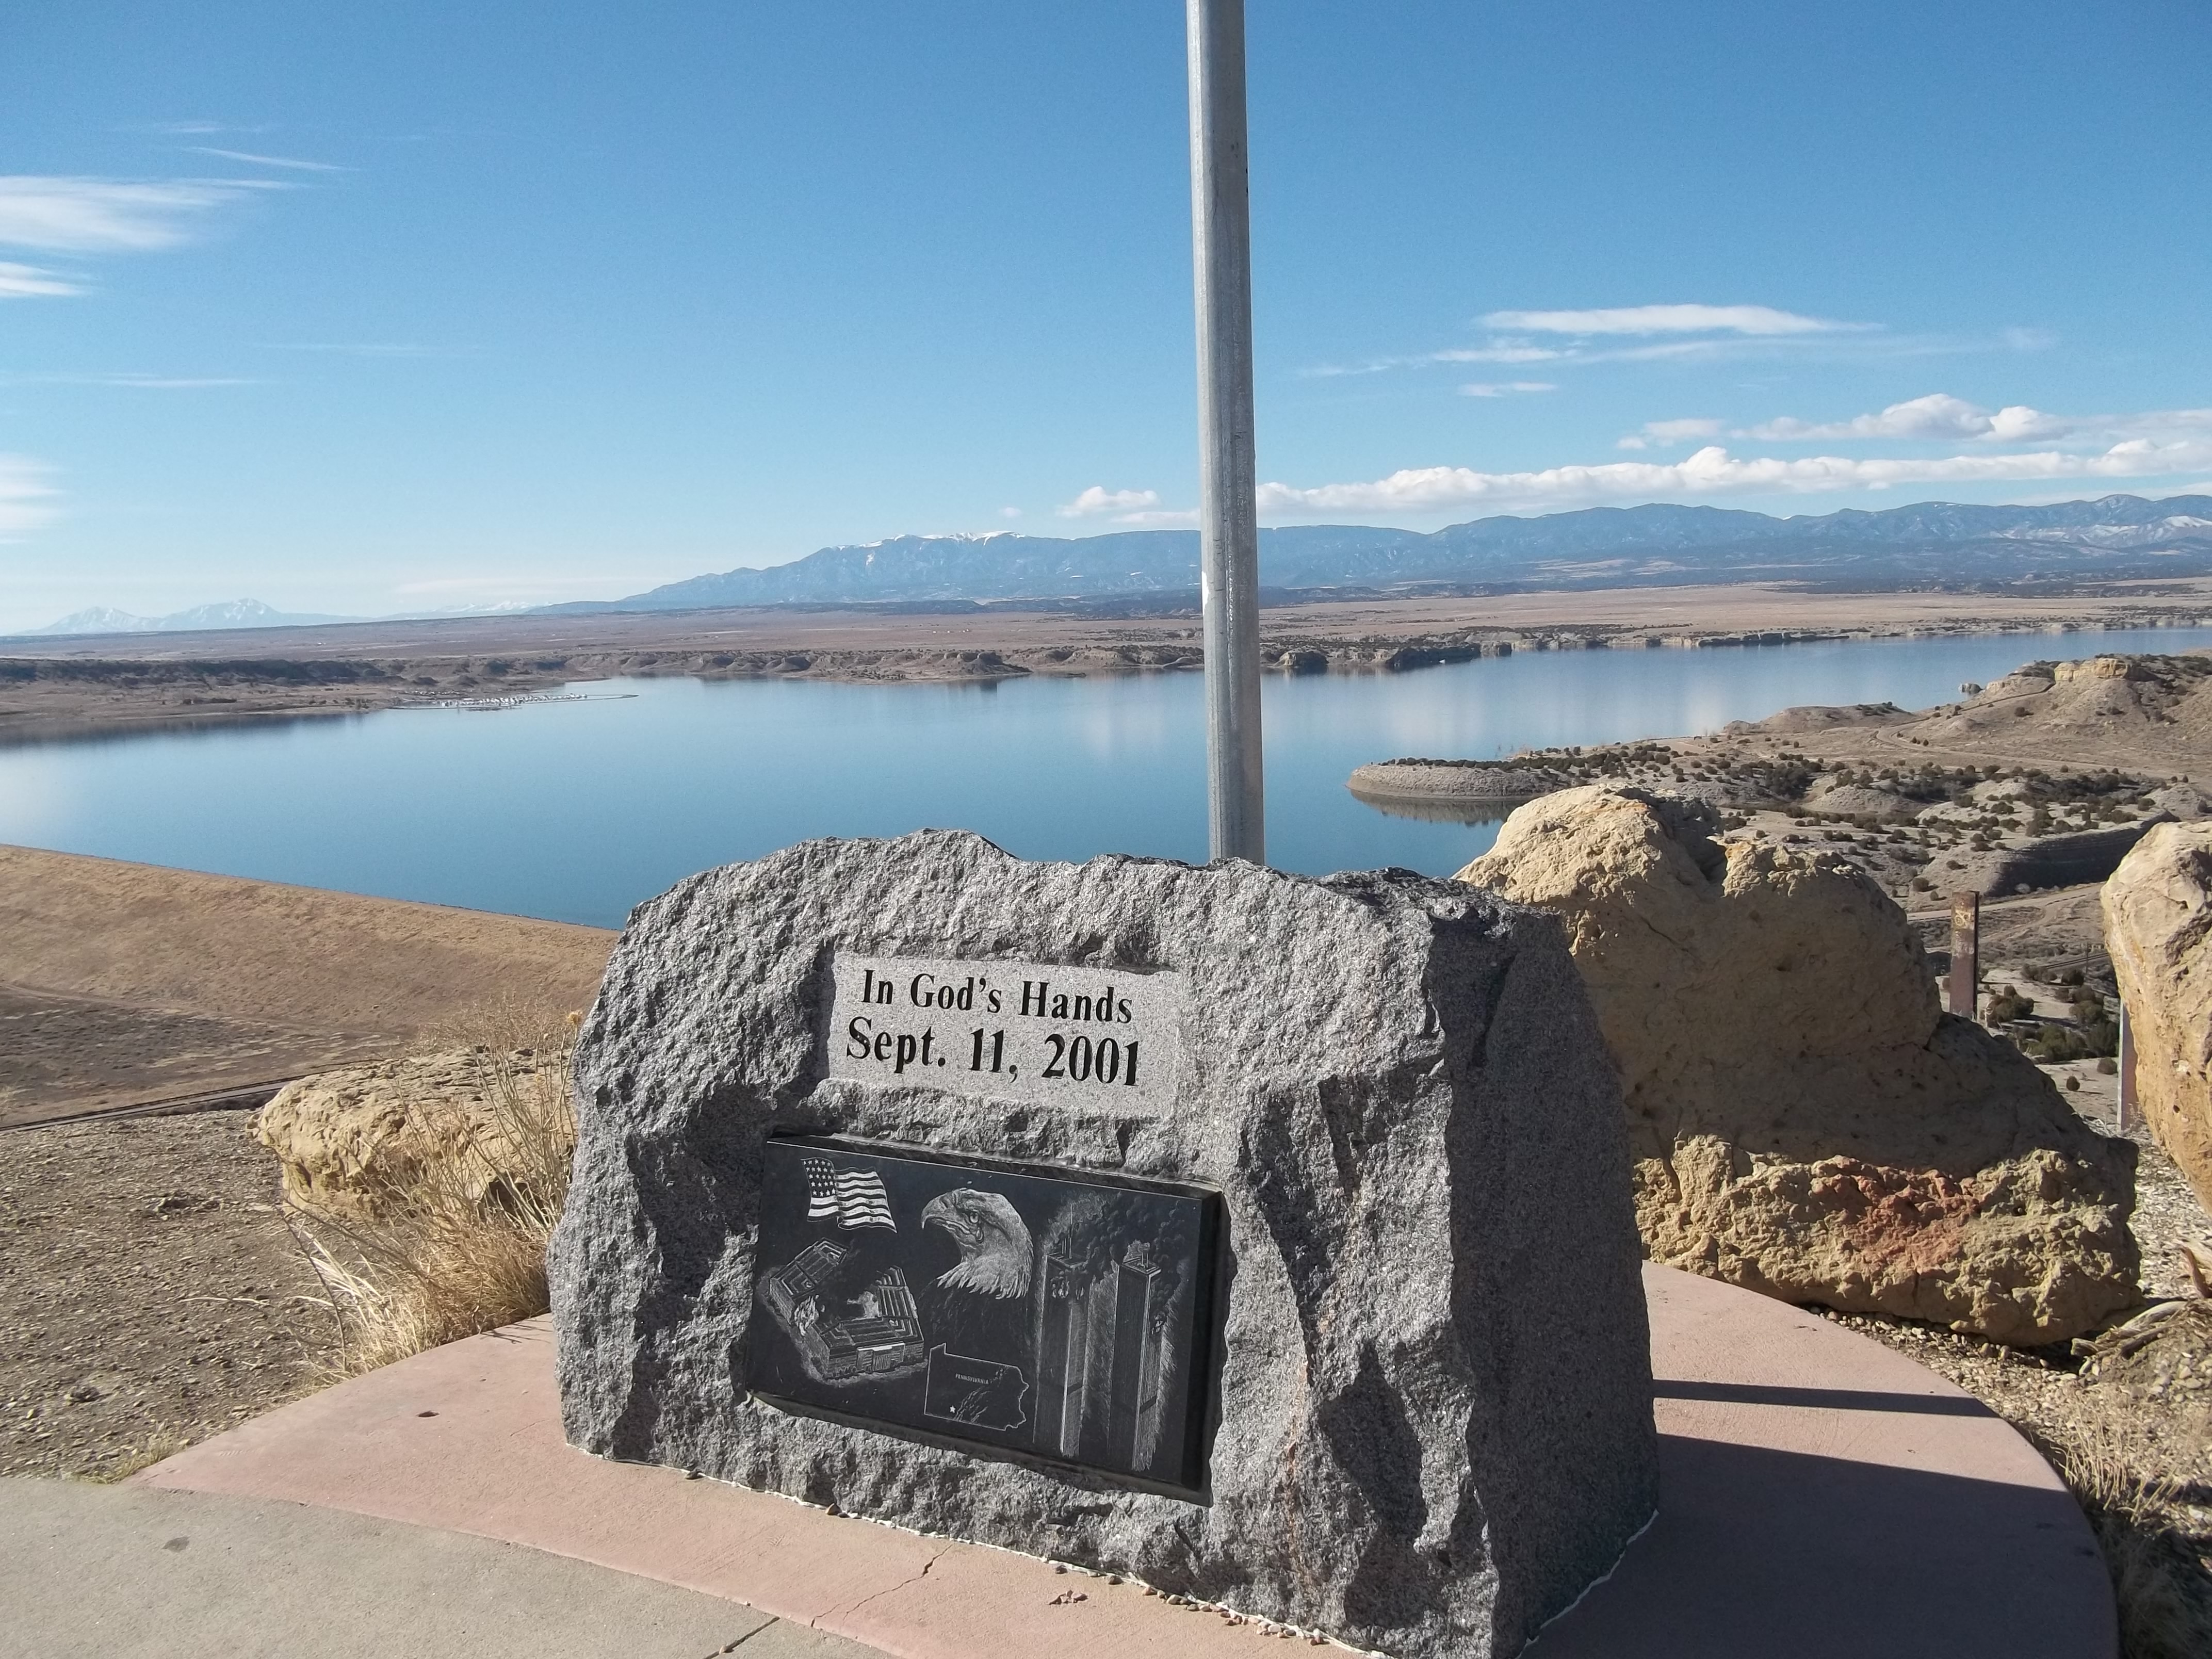 The Liberty Point 9/11 Memorial is seen on a hillside in Pueblo West, Colorado. Mountains and a big blue sky are seen in the background. The memorial reads “In God’s Hands September 11, 2001.”